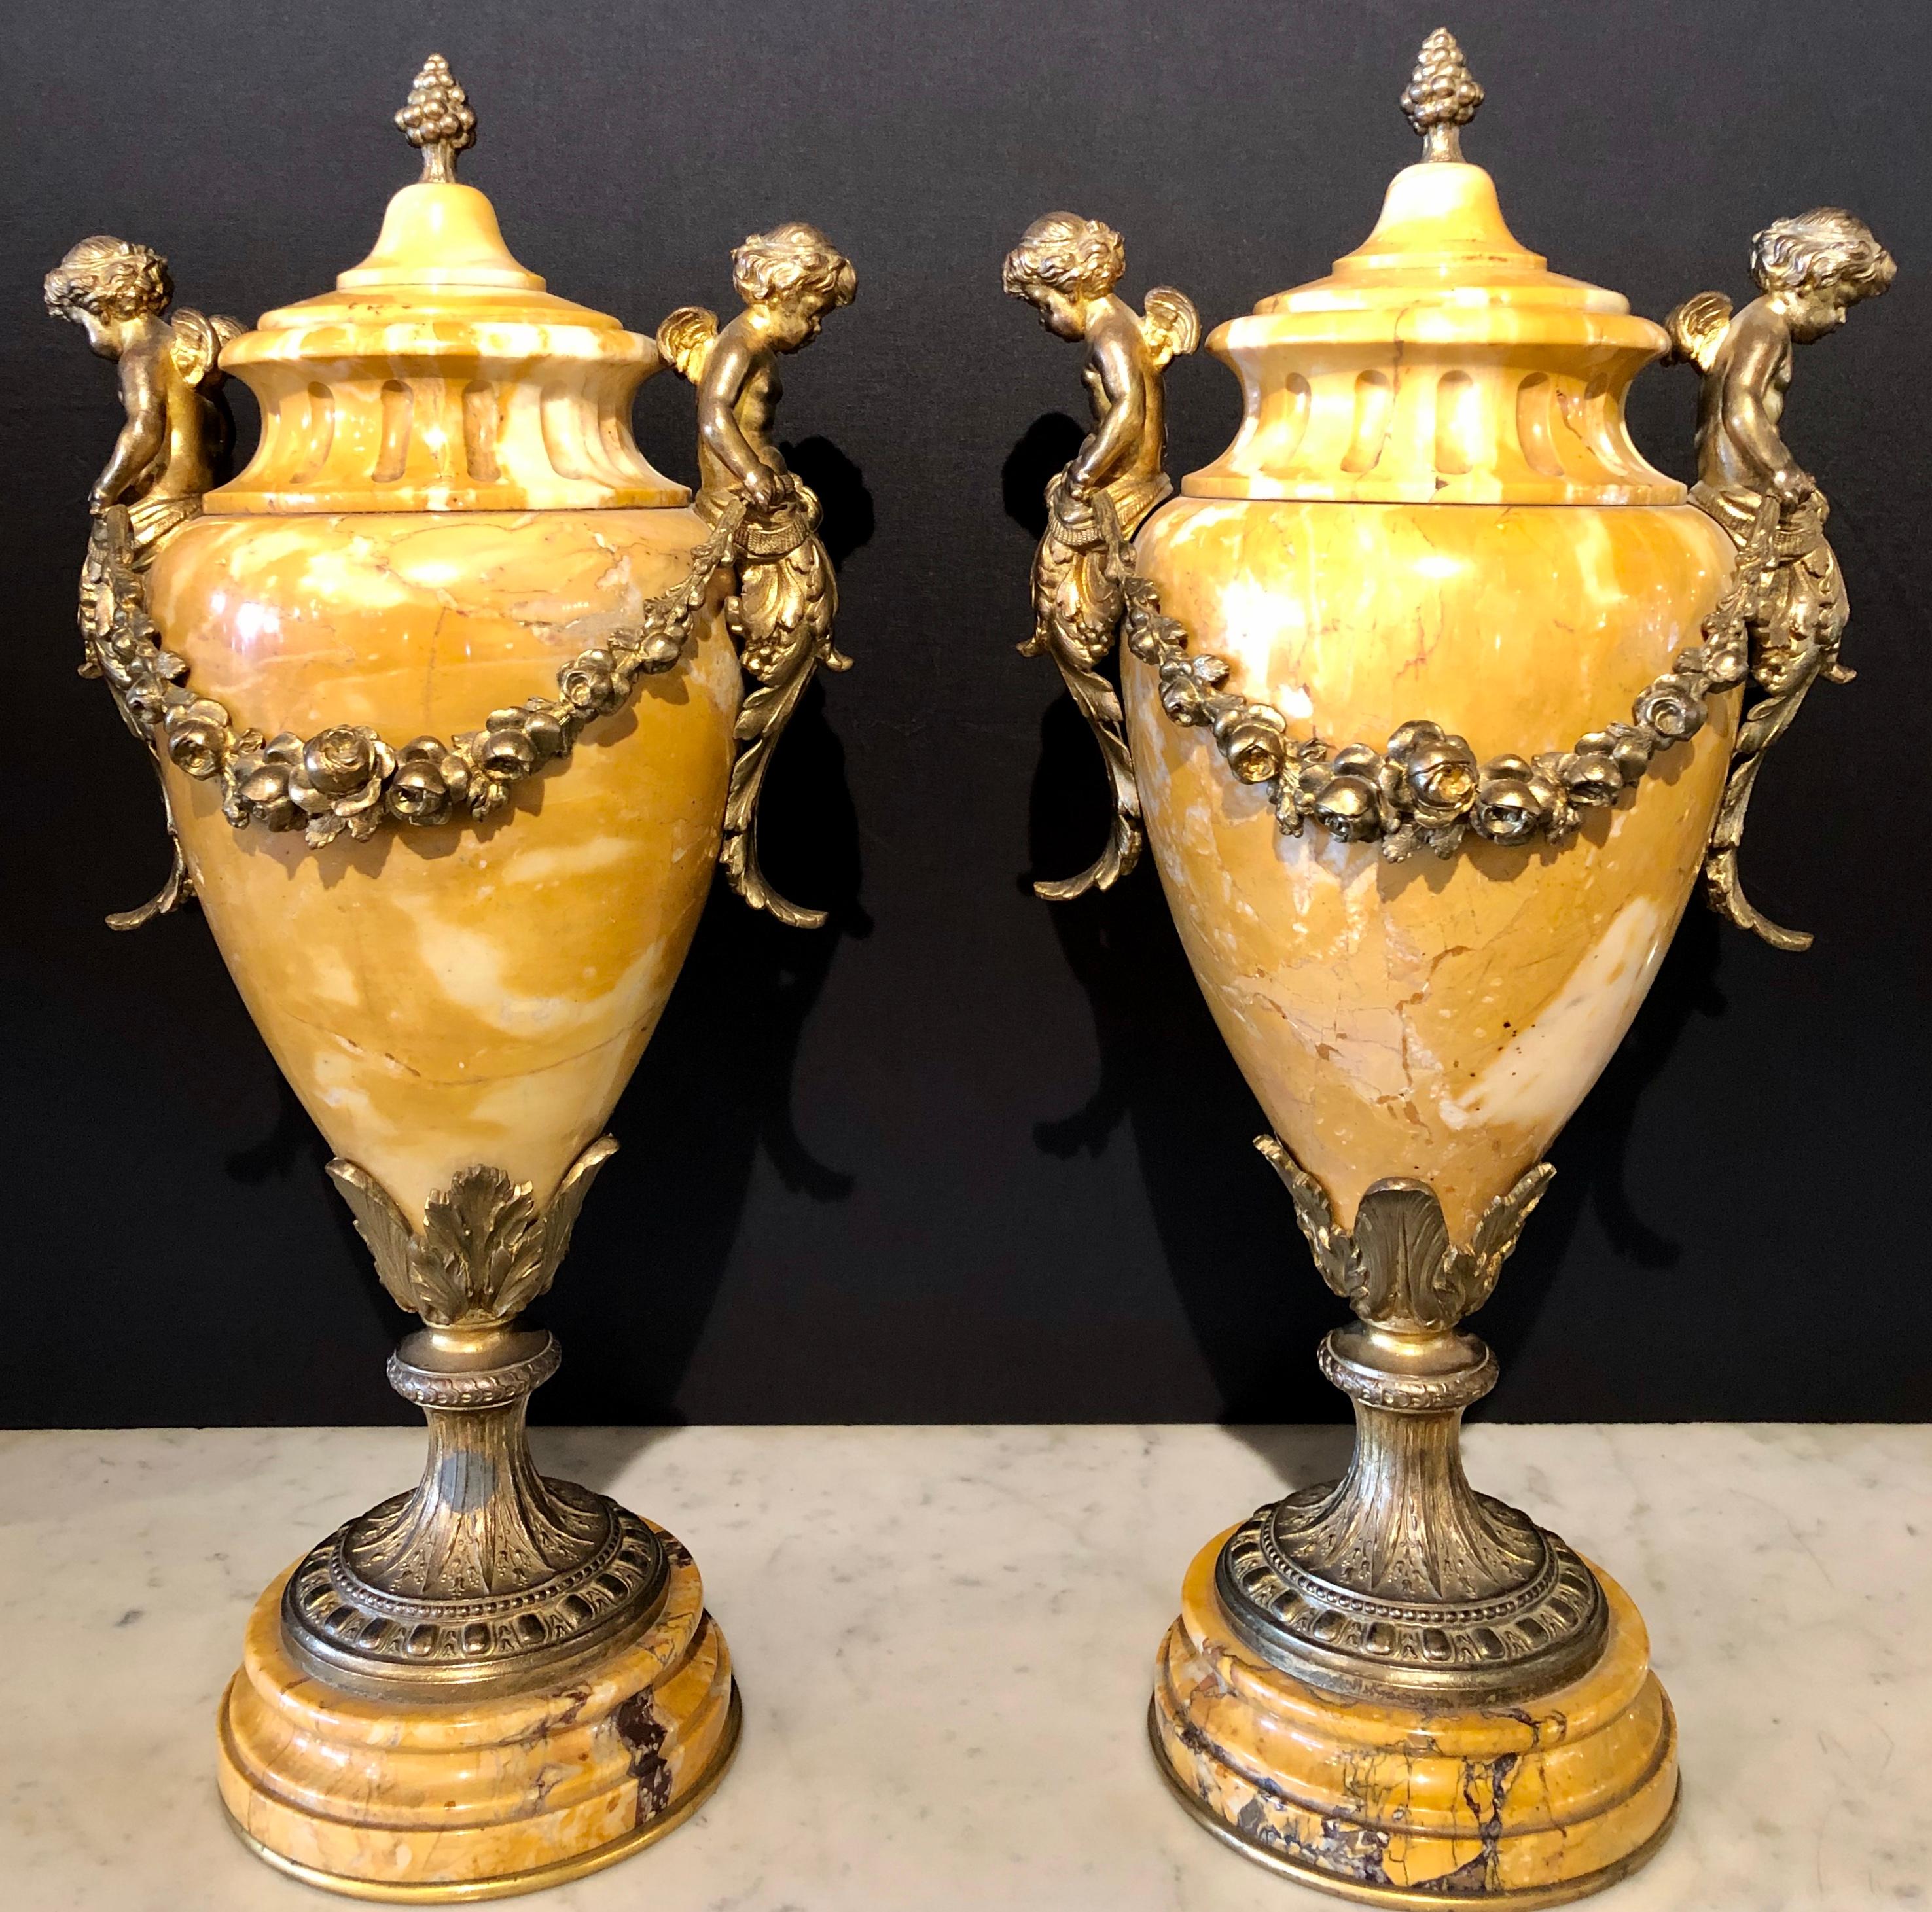 Pair of French bronze and marble Cassolettes each with cherubs having lids. These fine covered cassolettes with bronze putti mounted handles and valances, fluted top rim and tapered base to bronze and marble socle bases are certain to make a